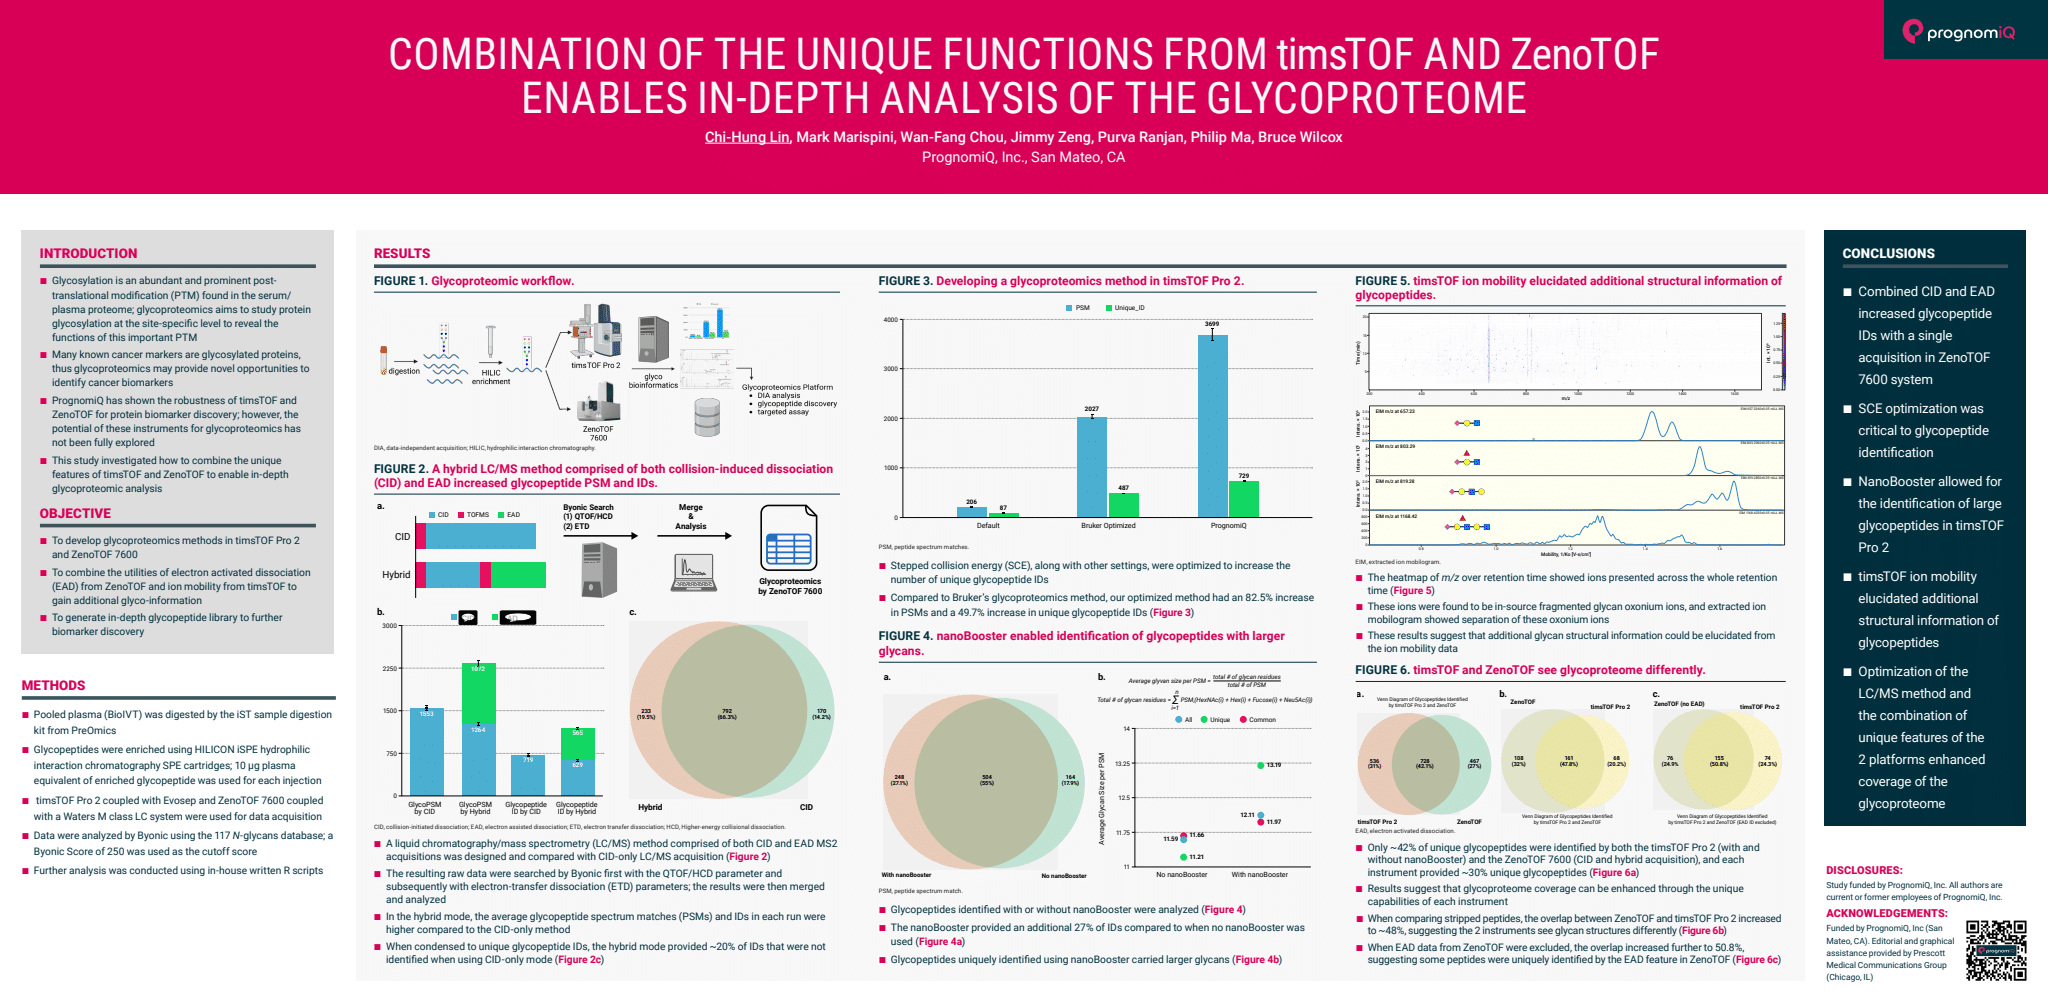 scientific poster showing a combination of the unique functions from timstof and zenotof enables in-depth analysis of the glycoproteome